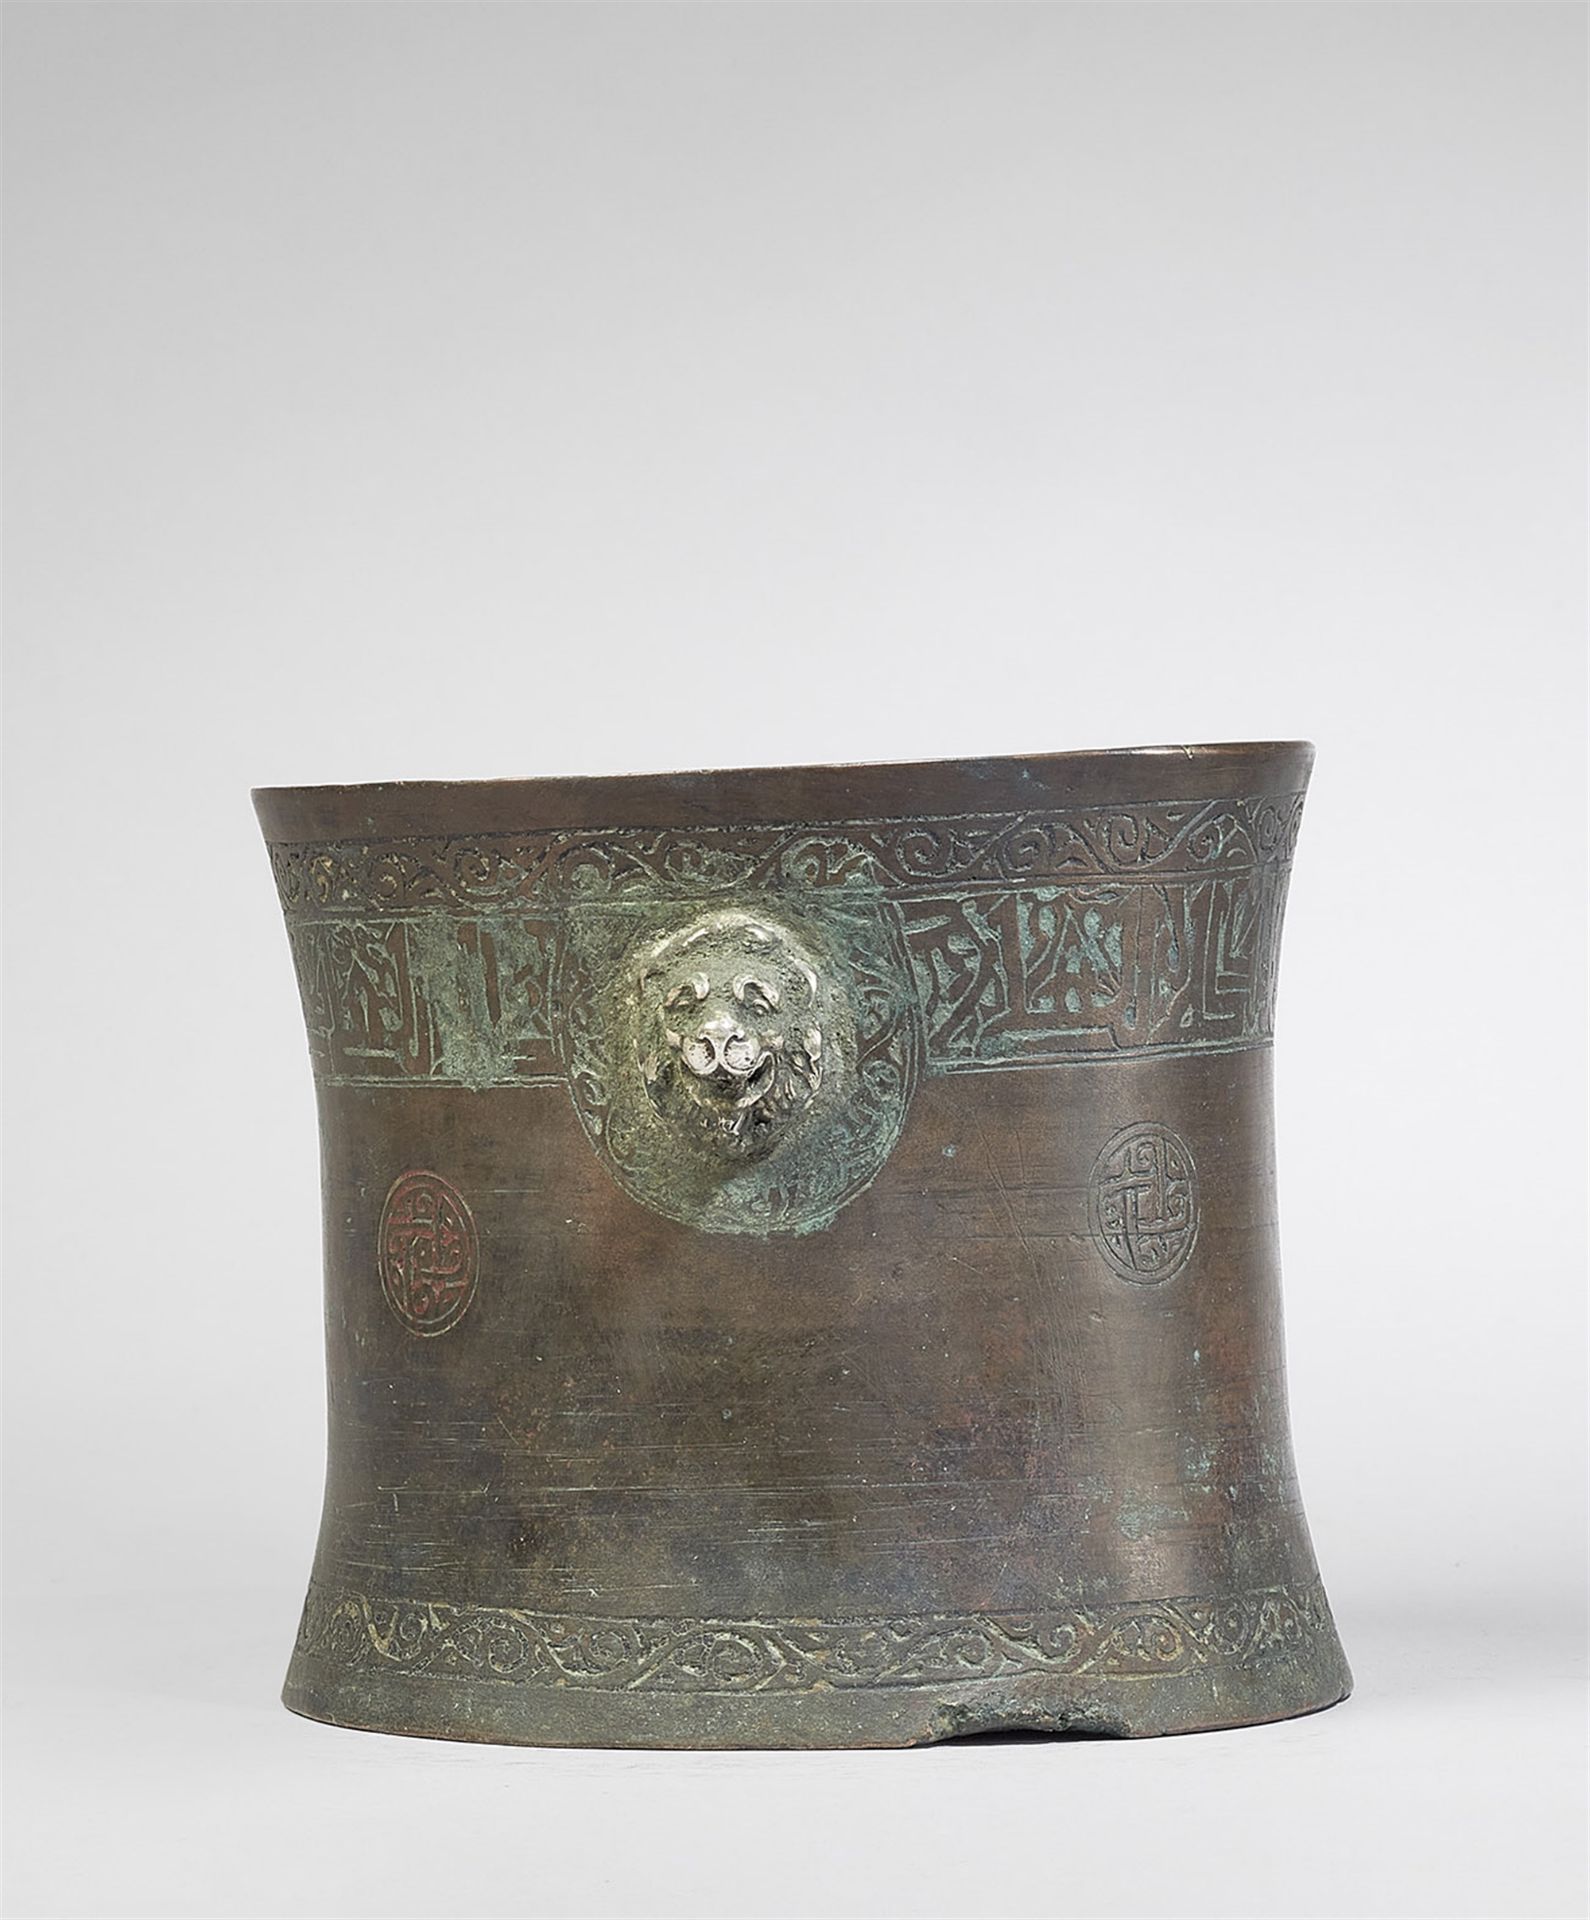 An Islamic mortar with lion's head handles - Image 4 of 4